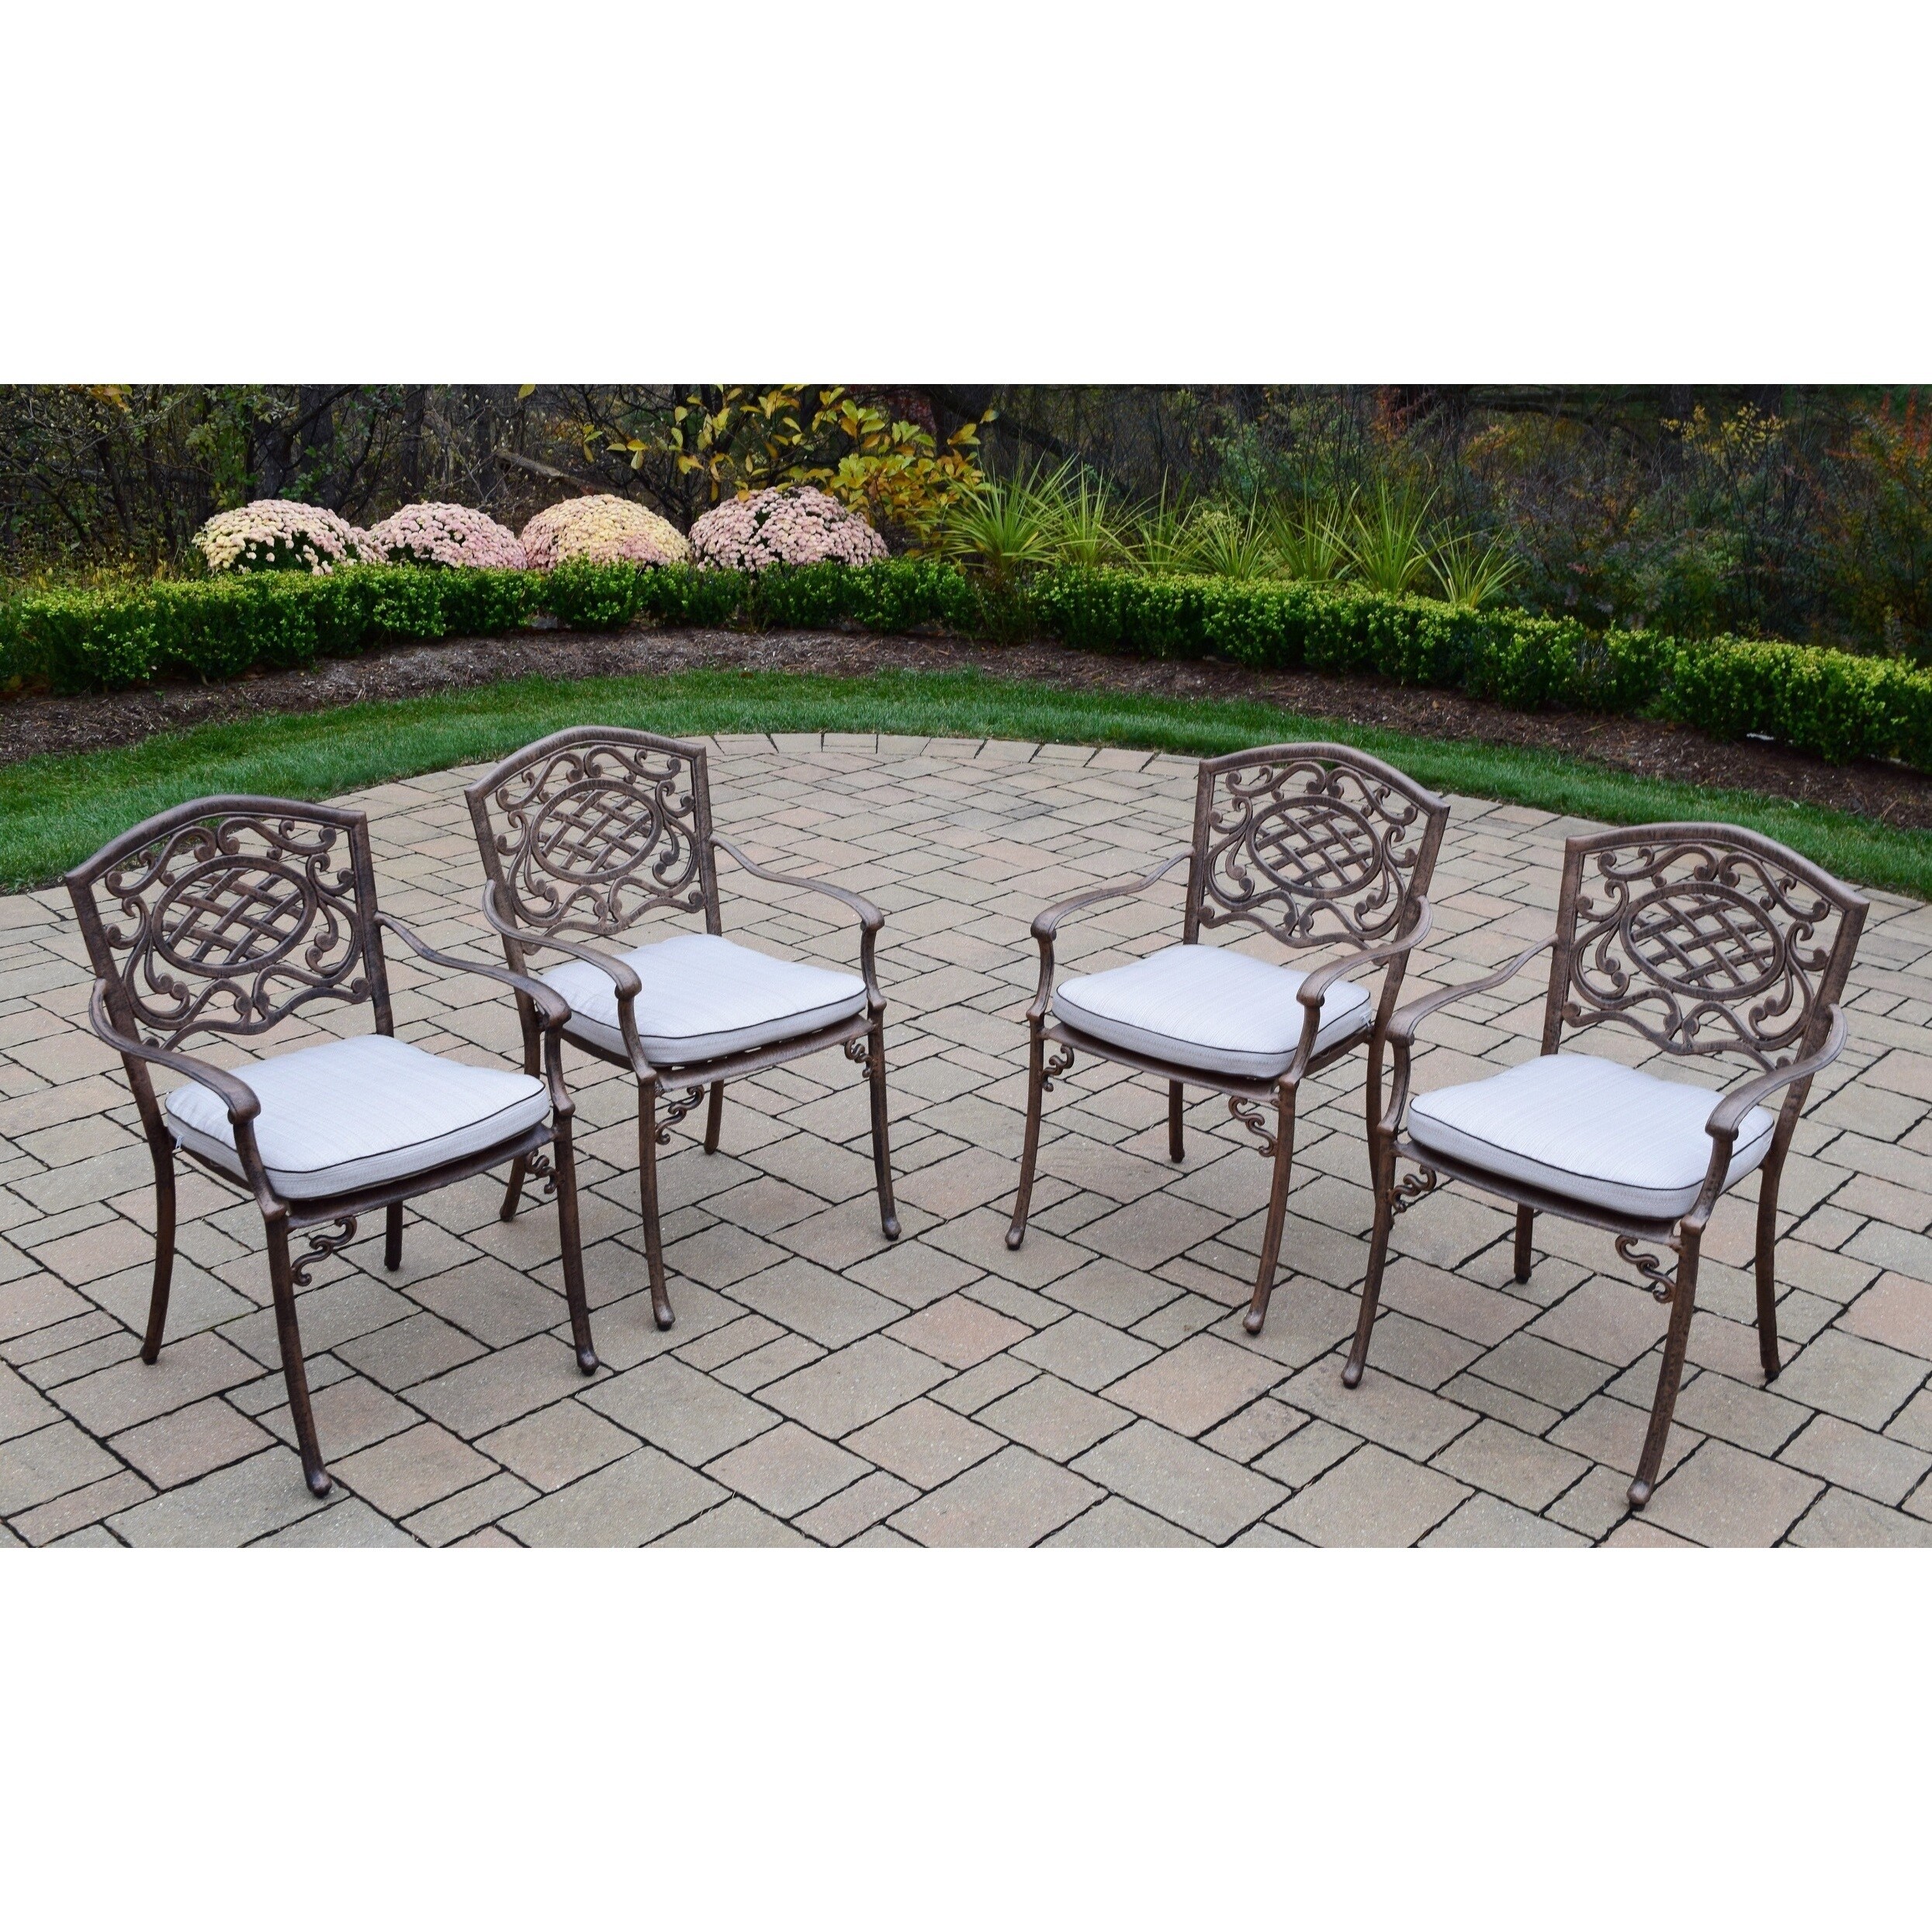 dakota cast aluminum welded stackable chairs with cushions set of 4